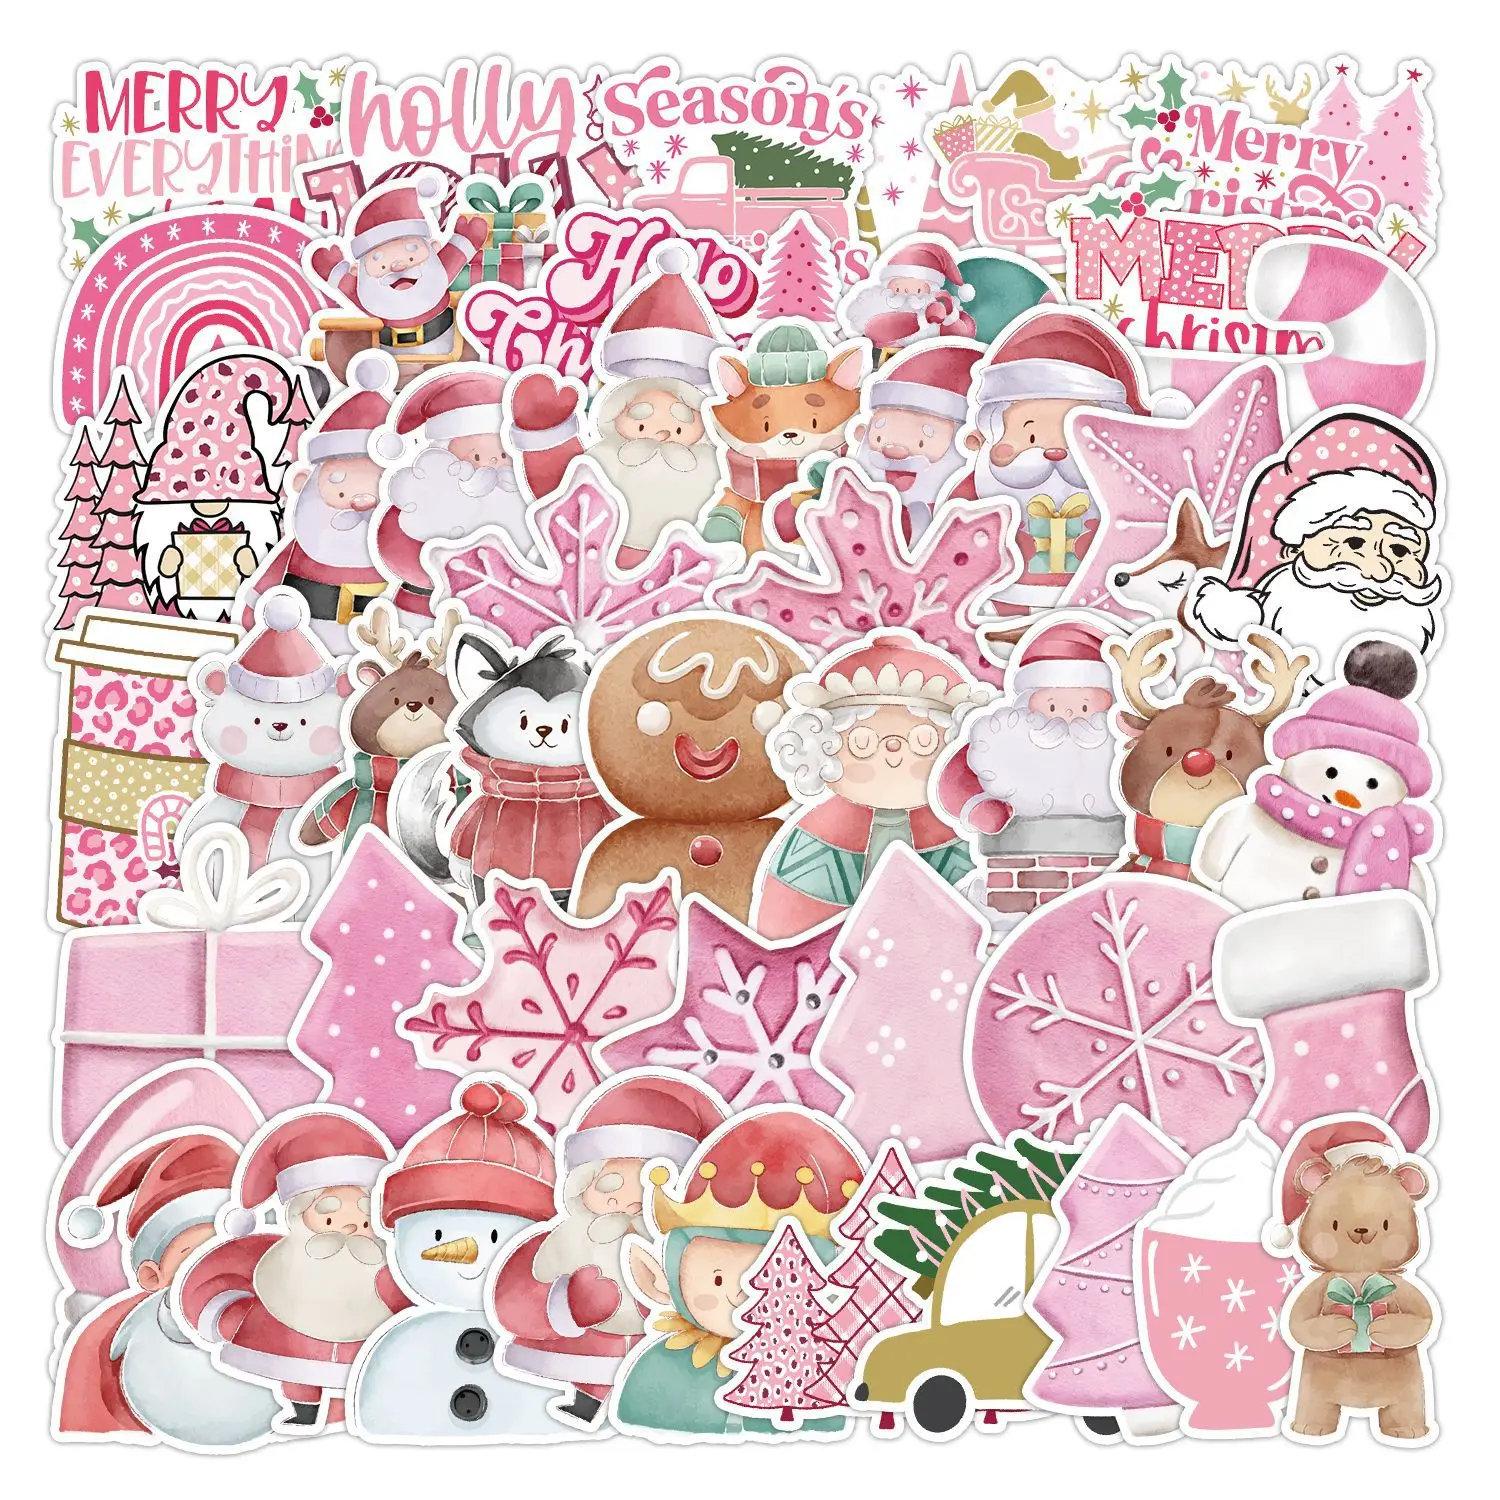 

10/30/50PCS New Year Merry Christmas Pink Stickers Deer Santa Claus Snowman Children Gift Decal for Skateboard Luggage Suitcase